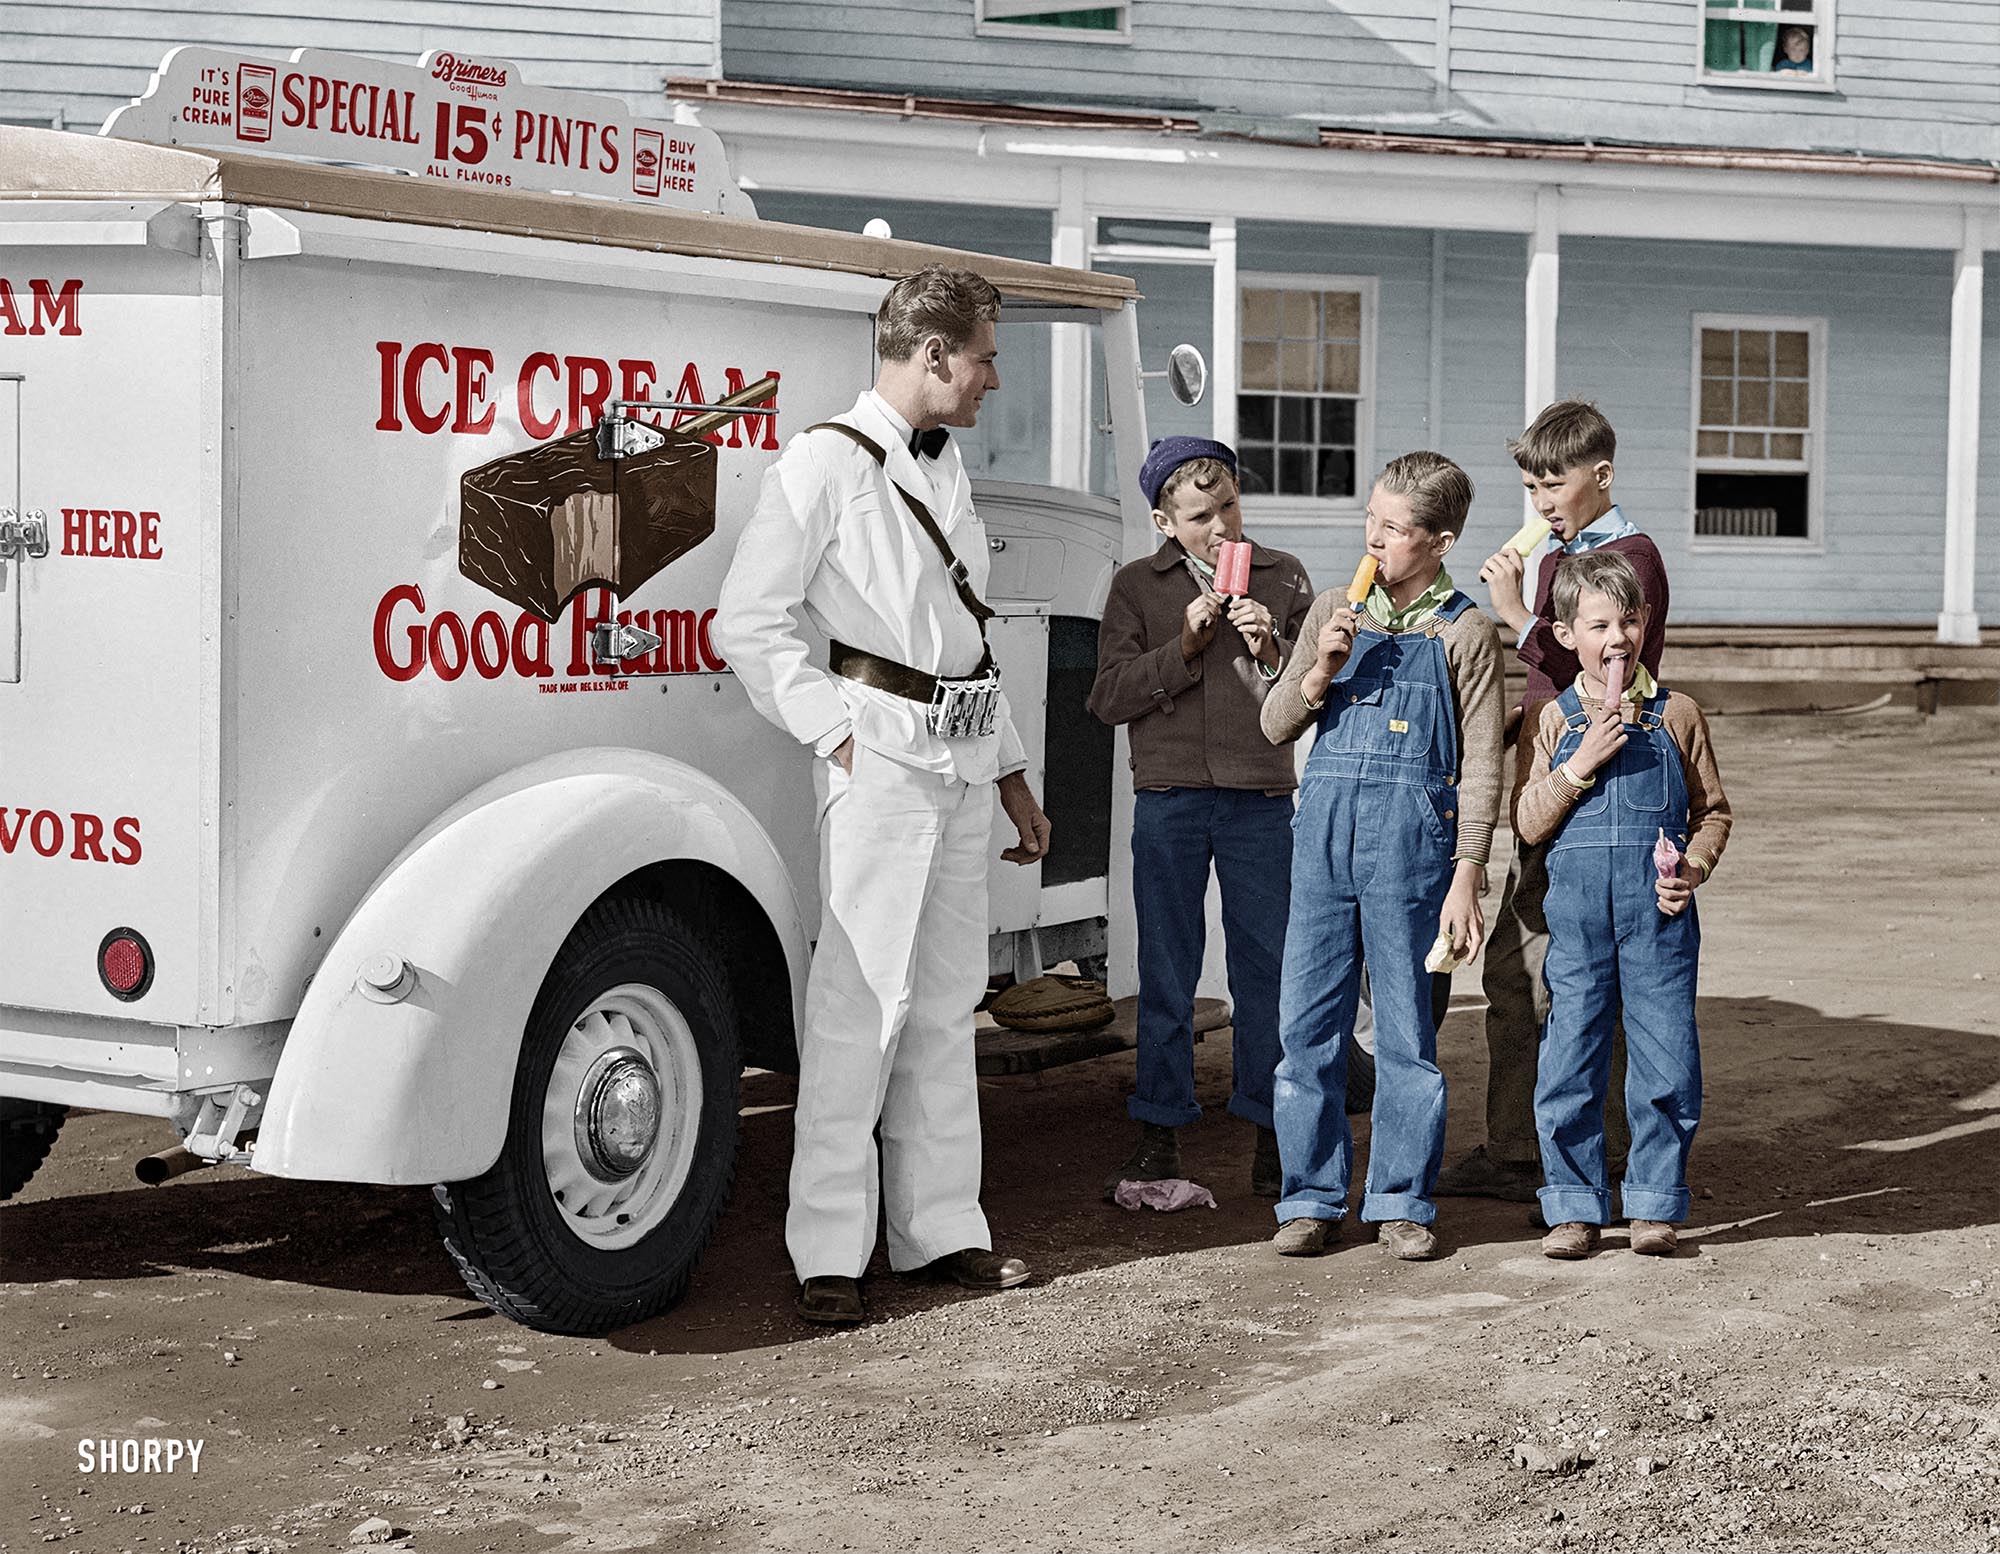 Every kid waits for the Good Humor Man, and it still happens today. Colorized version of this Shorpy image.